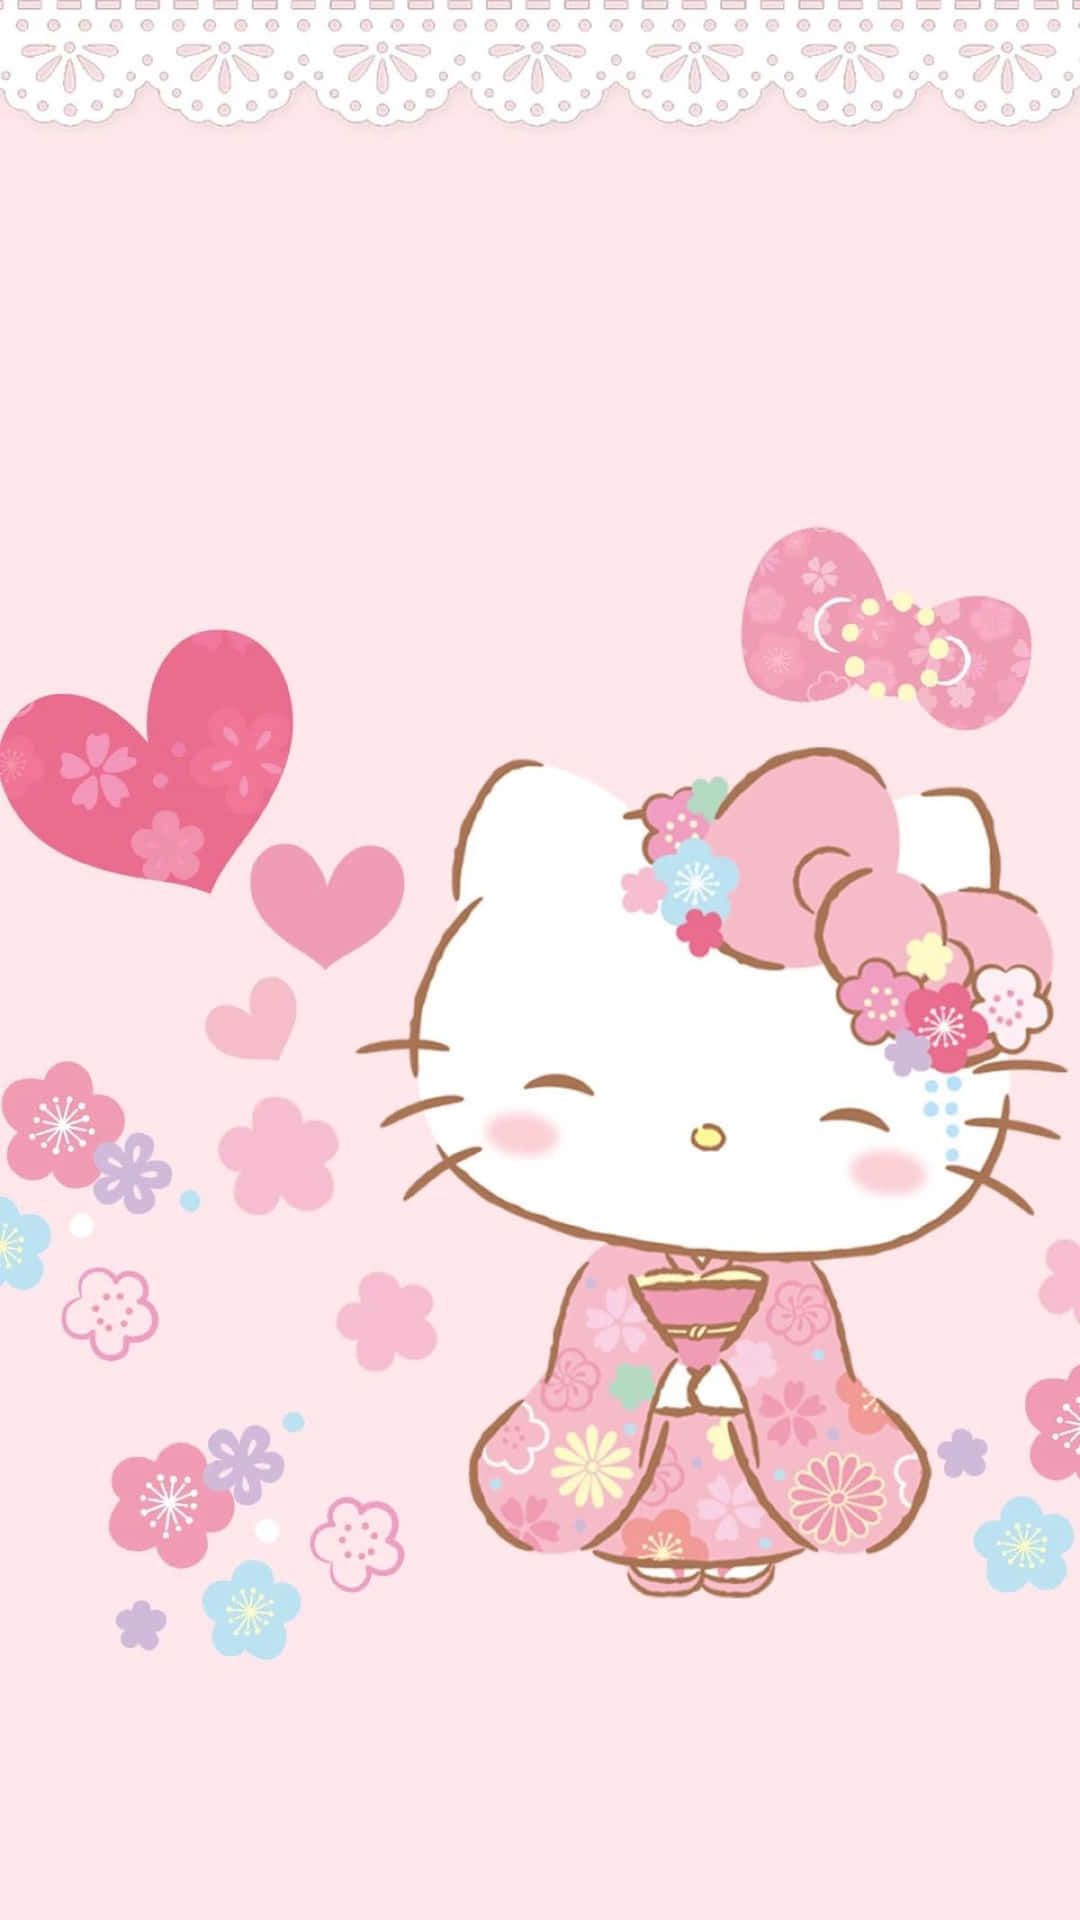 Express Your Personality with Sanrio Phone Wallpaper